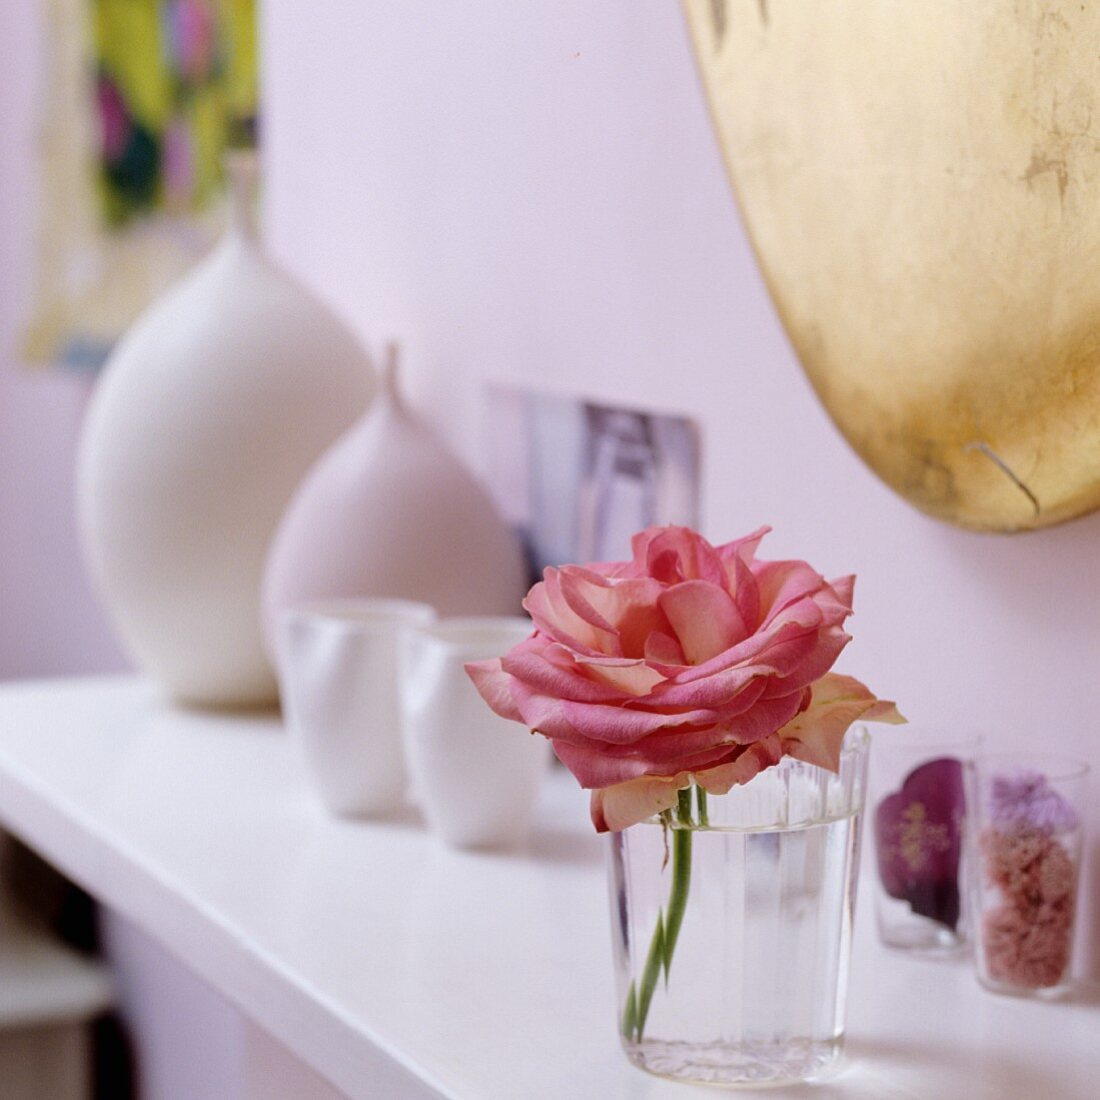 Rose in water glass on shelf against lilac wall